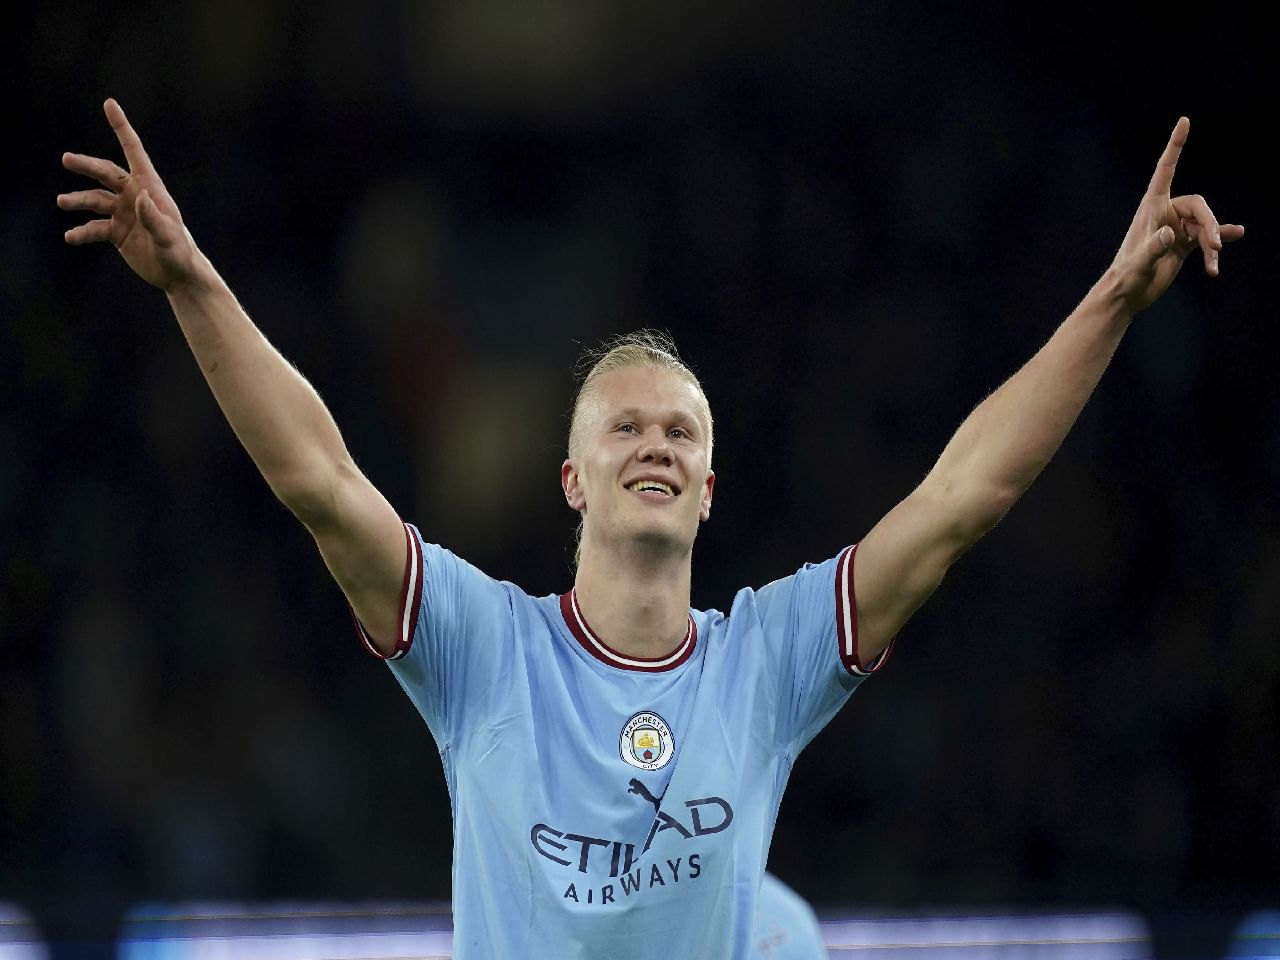 Why Haaland could be key in Man City’s revenge clash against Real Madrid